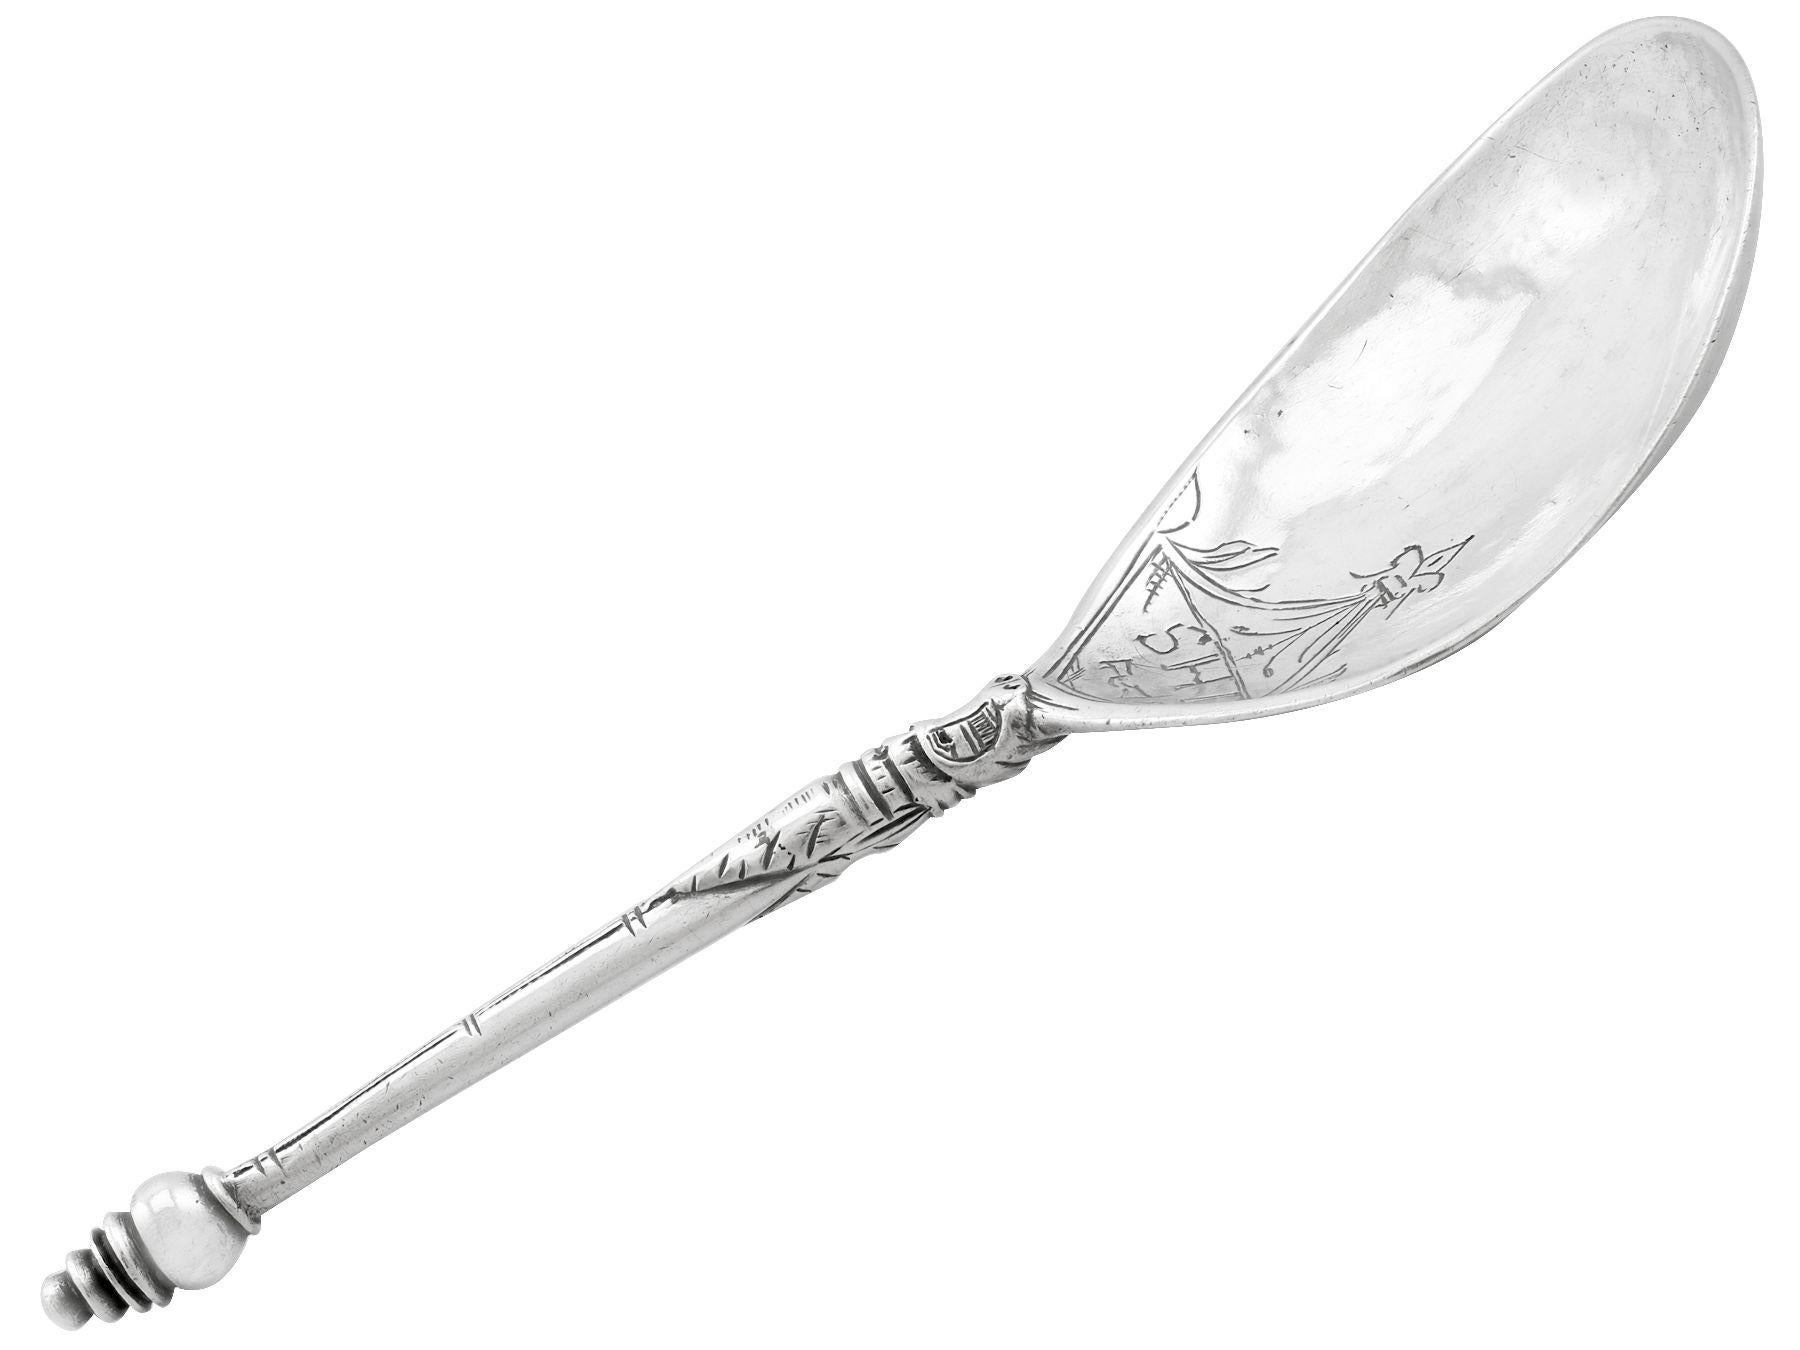 An exceptional antique 17th century Norwegian silver spoon; an addition to our silver teaware collection.

This exceptional antique Norwegian silver spoon has an oval rounded shaped form with a narrow stem handle and knopped terminal.

The bowl is